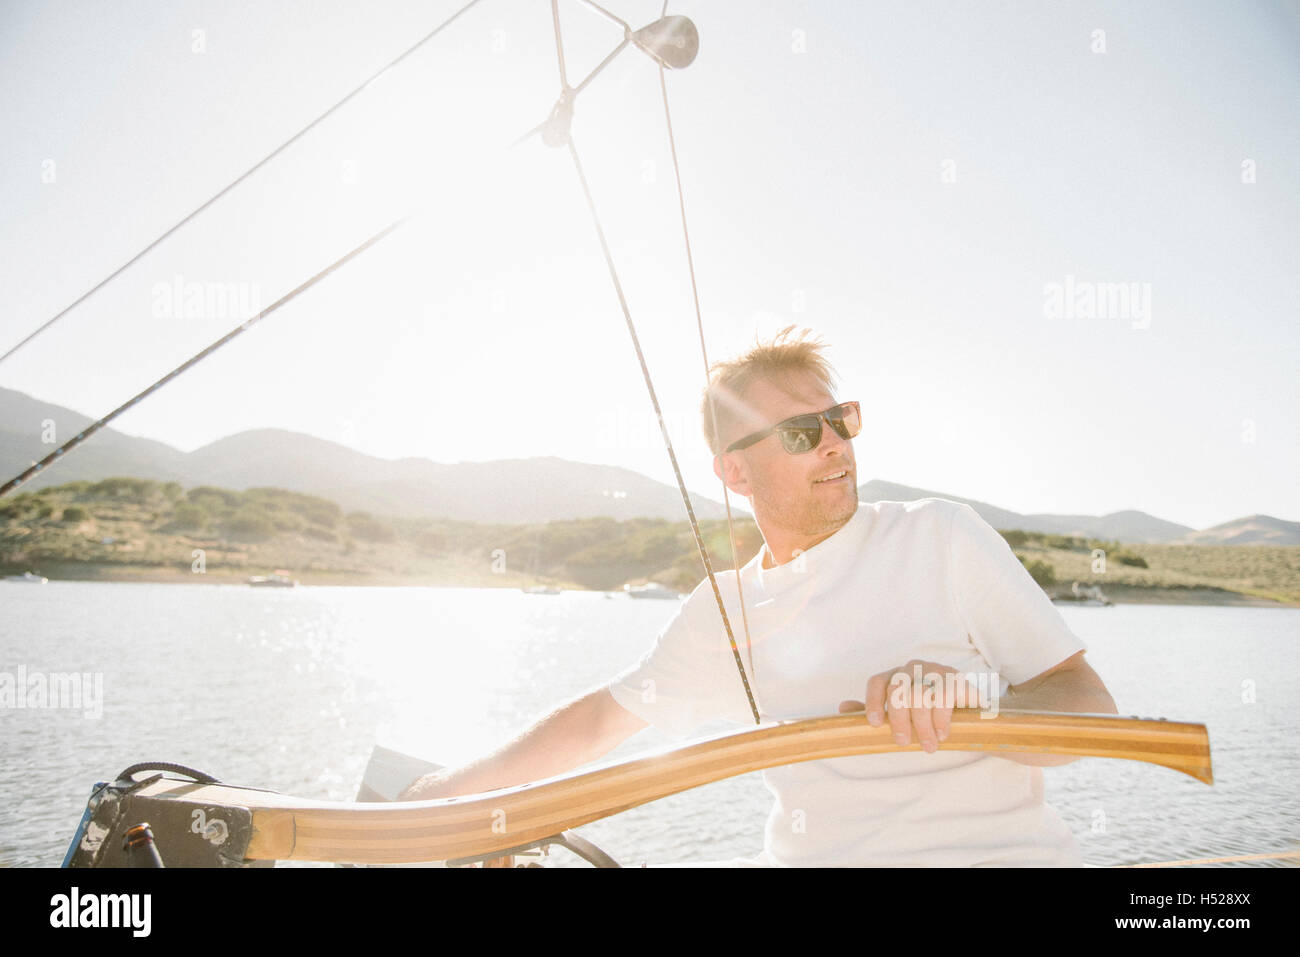 Portrait of a blond man with sunglasses steering a sail boat. Stock Photo